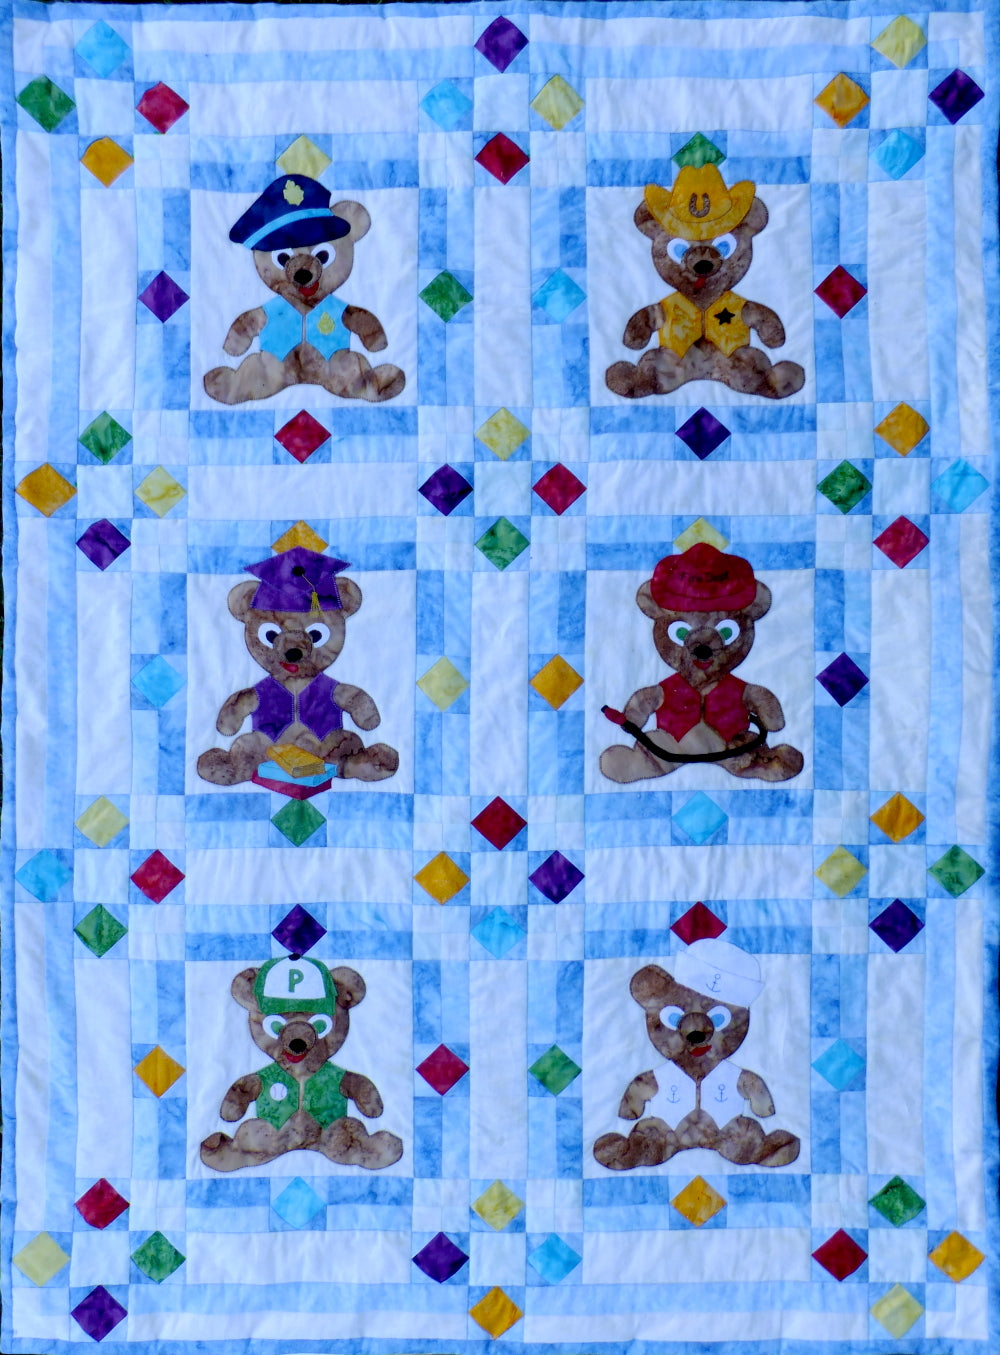 teddy bear quilt pattern with occuptional costumes